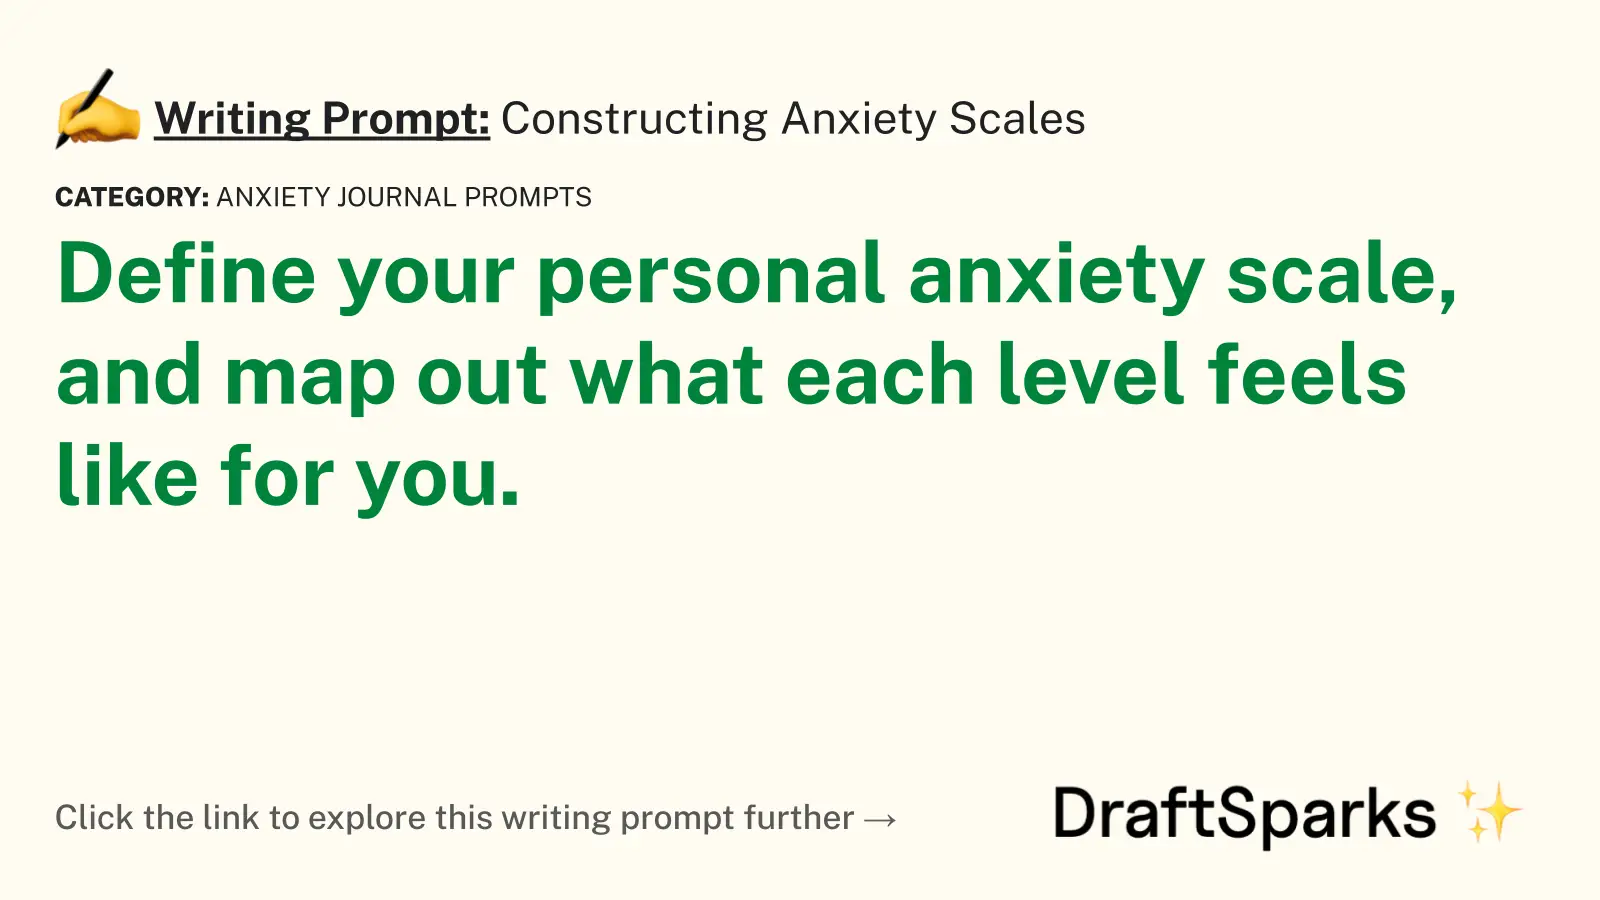 Constructing Anxiety Scales